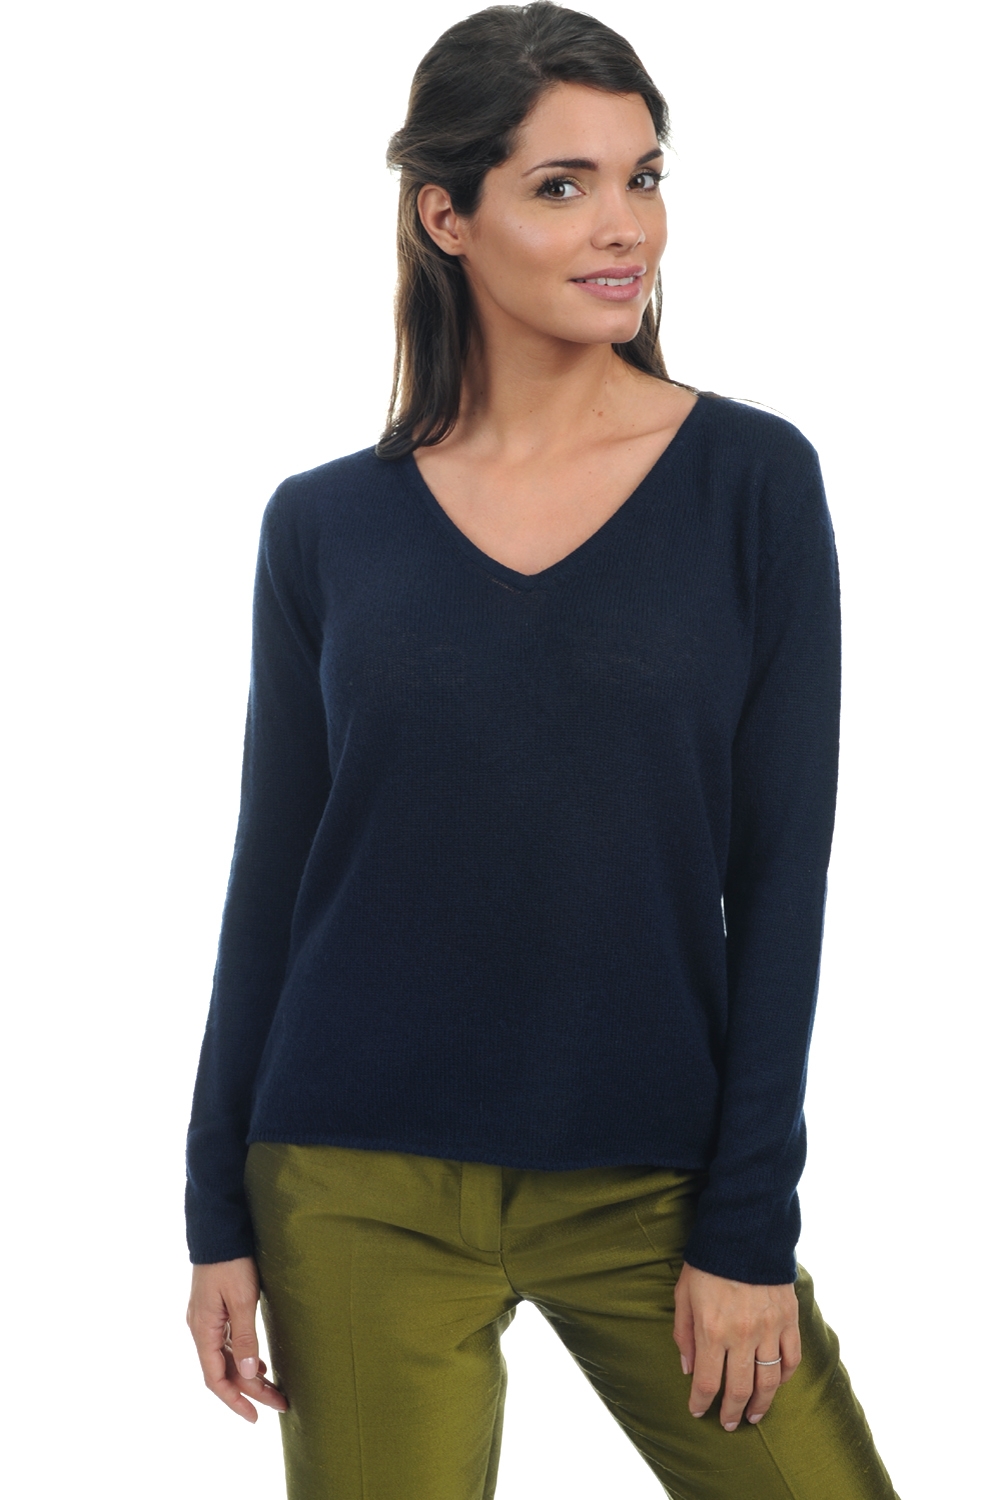 Cashmere ladies basic sweaters at low prices flavie dress blue 2xl